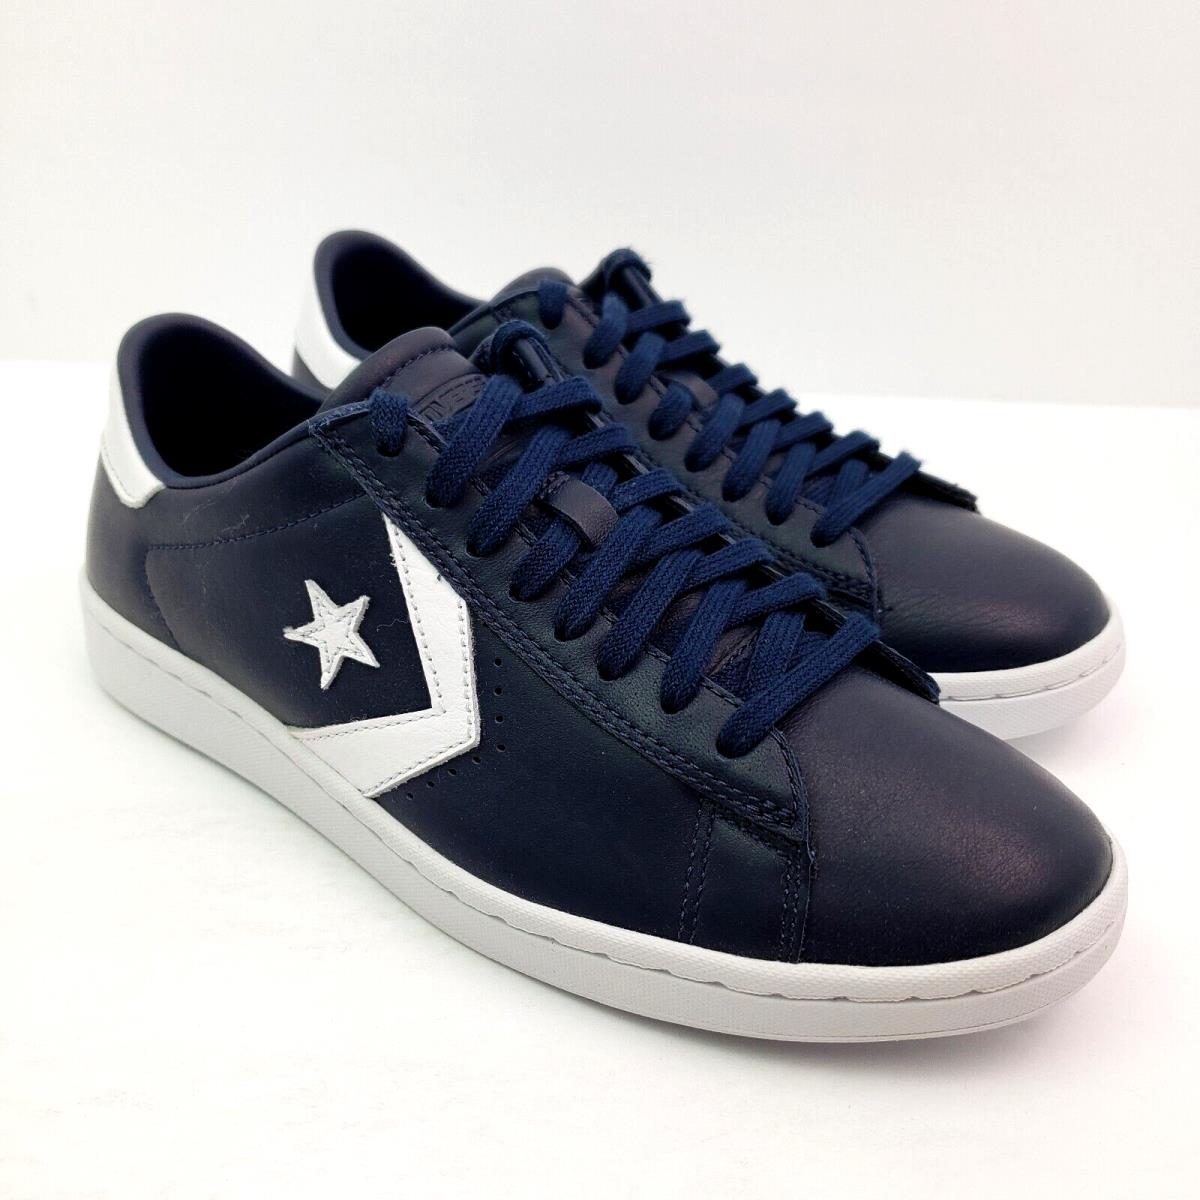 Converse One Star OX Womens Size 7.5 Obsidian Premium Leather Sneaker Shoes 5580